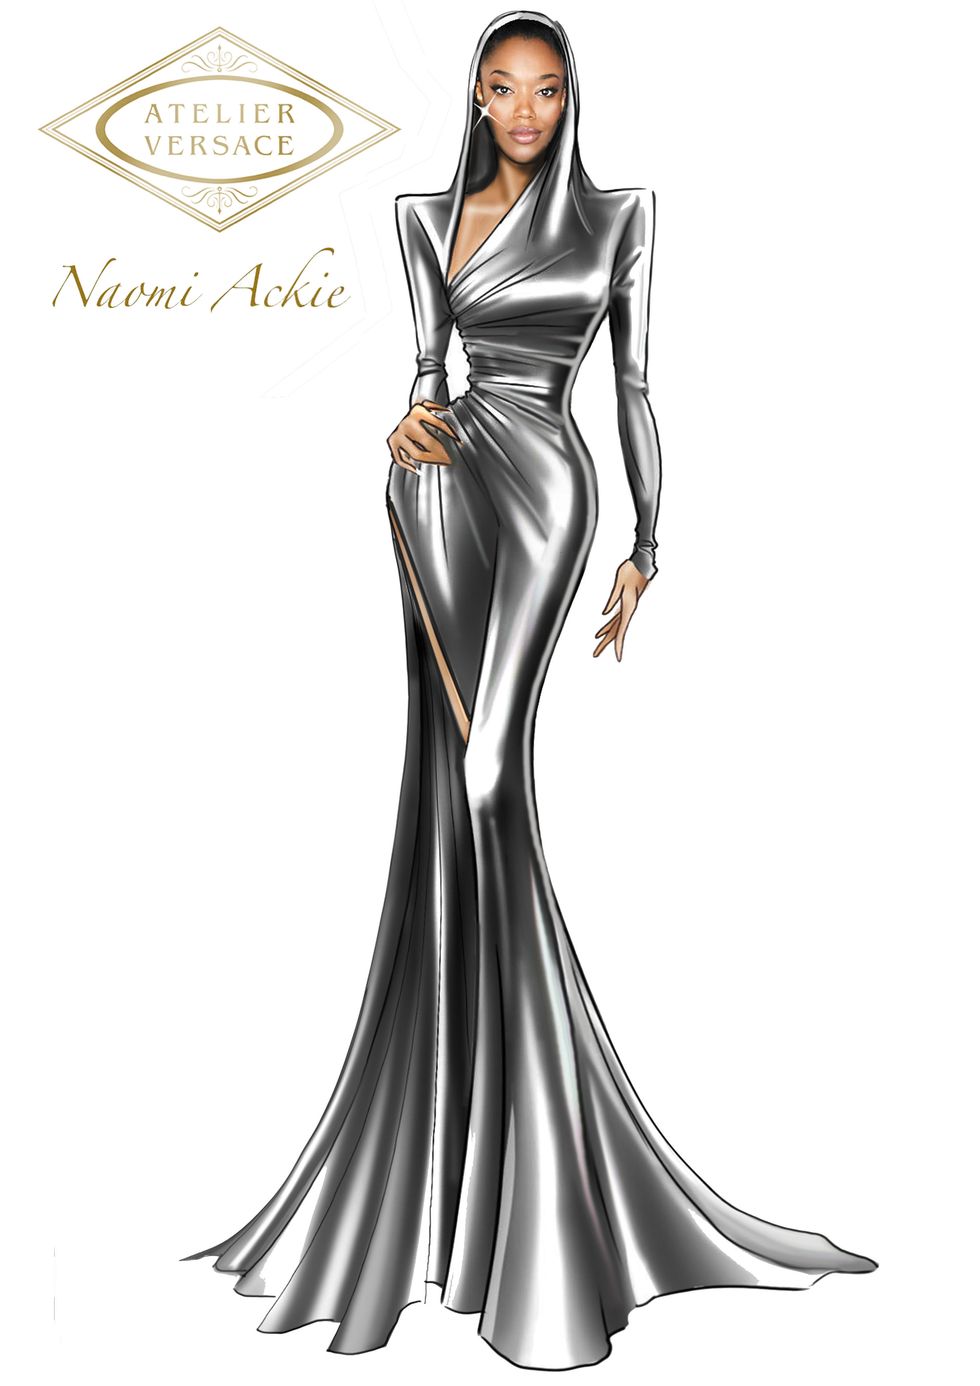 a versace sketch of the custom gown worn by naomi ackie